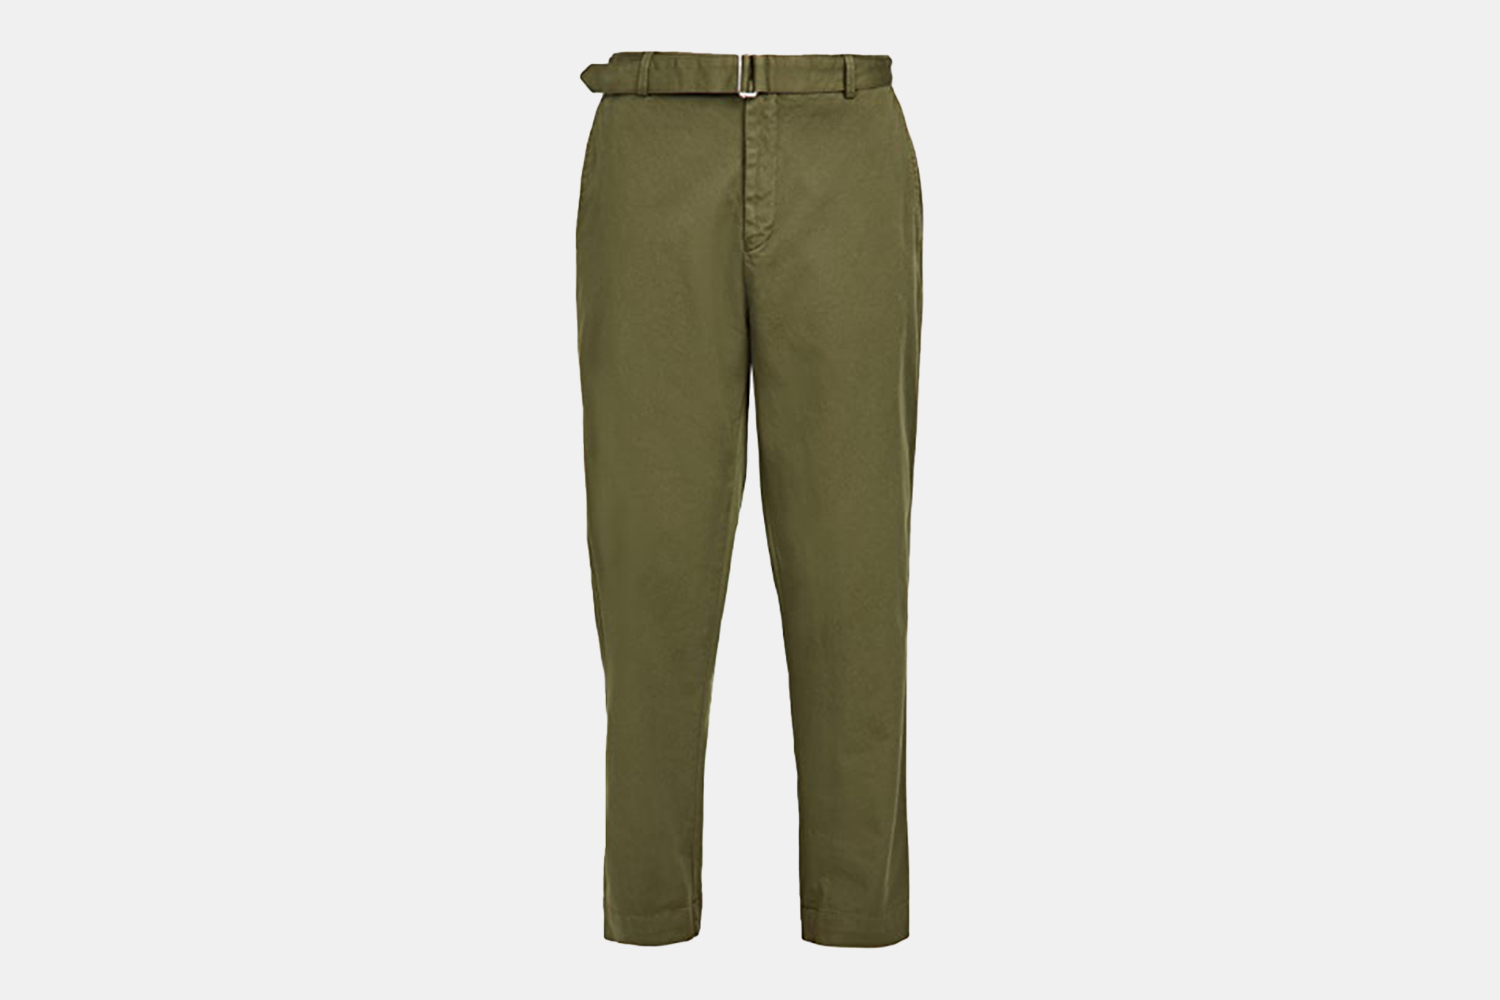 a pair of built-in belted, olive colored pants.